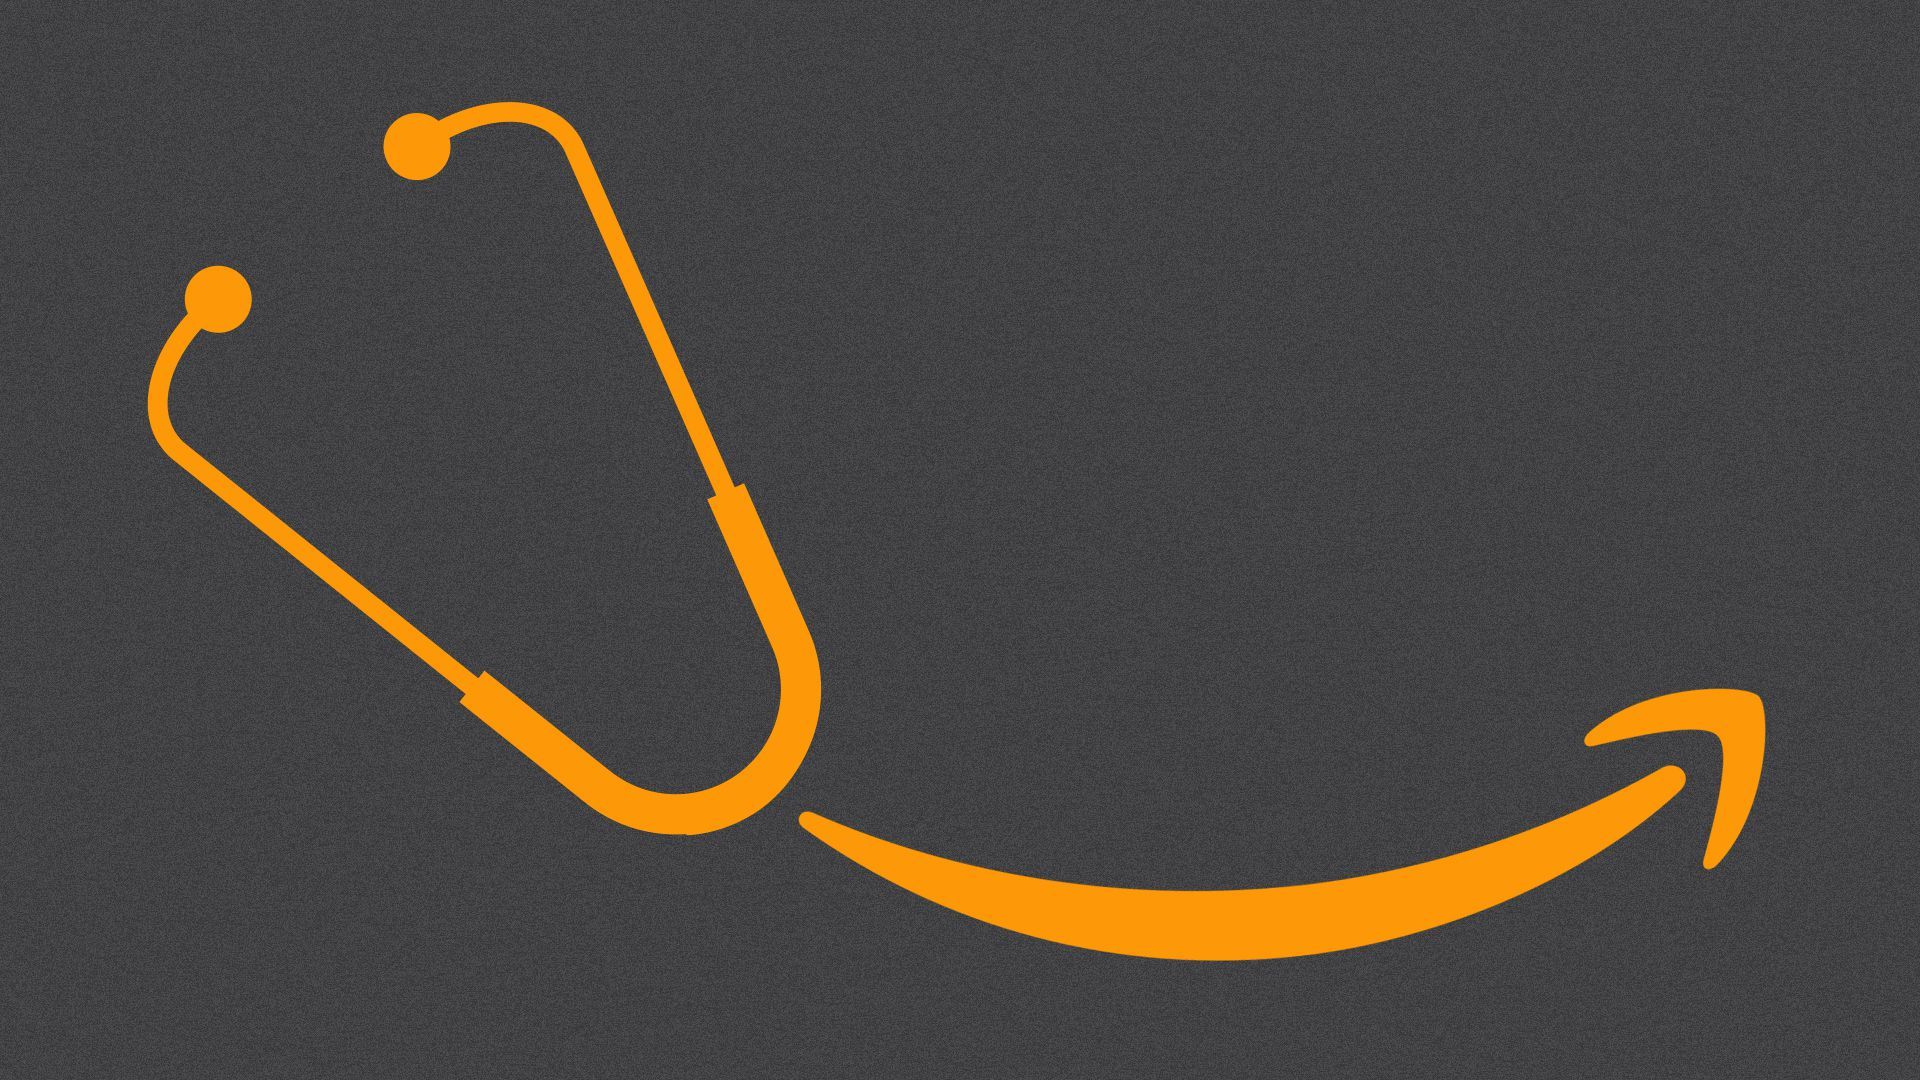 Illustration of a stethoscope made from Amazon's logo.